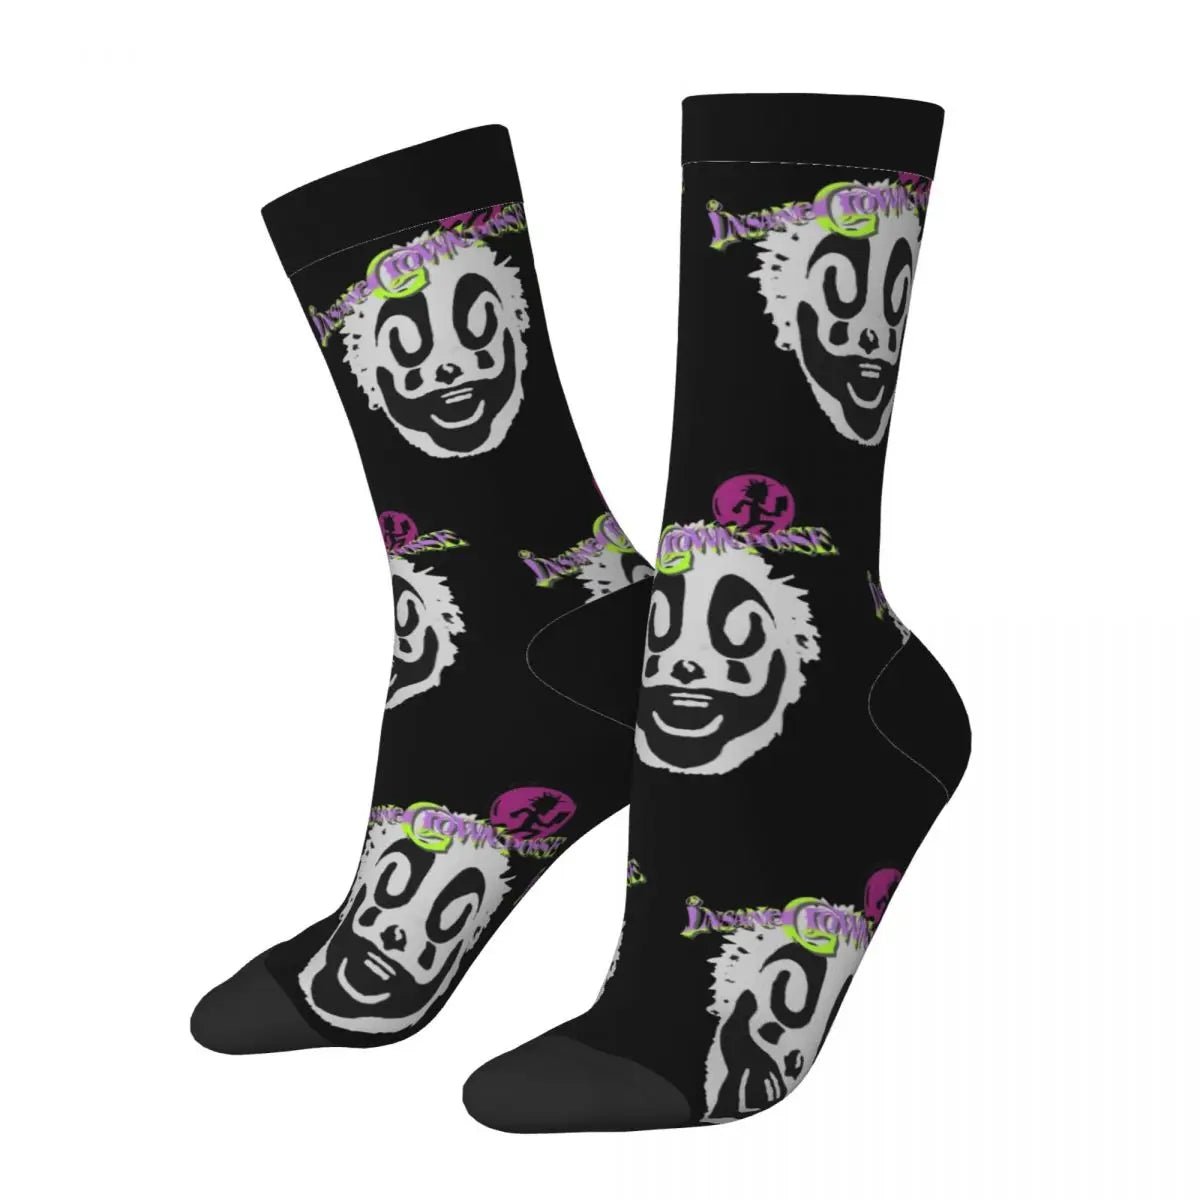 Juggalo Socks - The Rave Cave